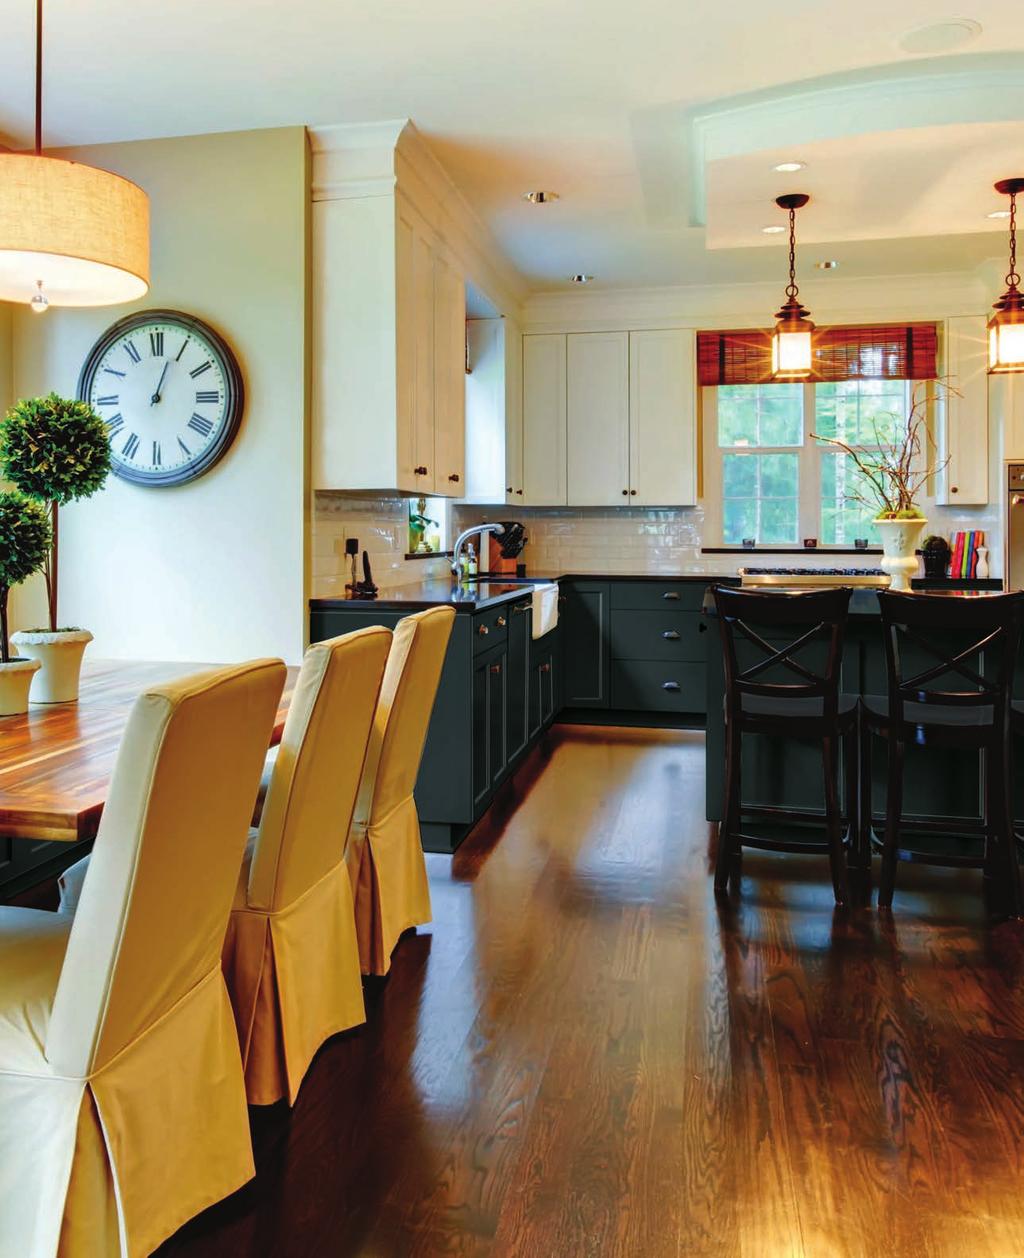 6 Echelon Cabinetry Maple Cabinetry A distinctive